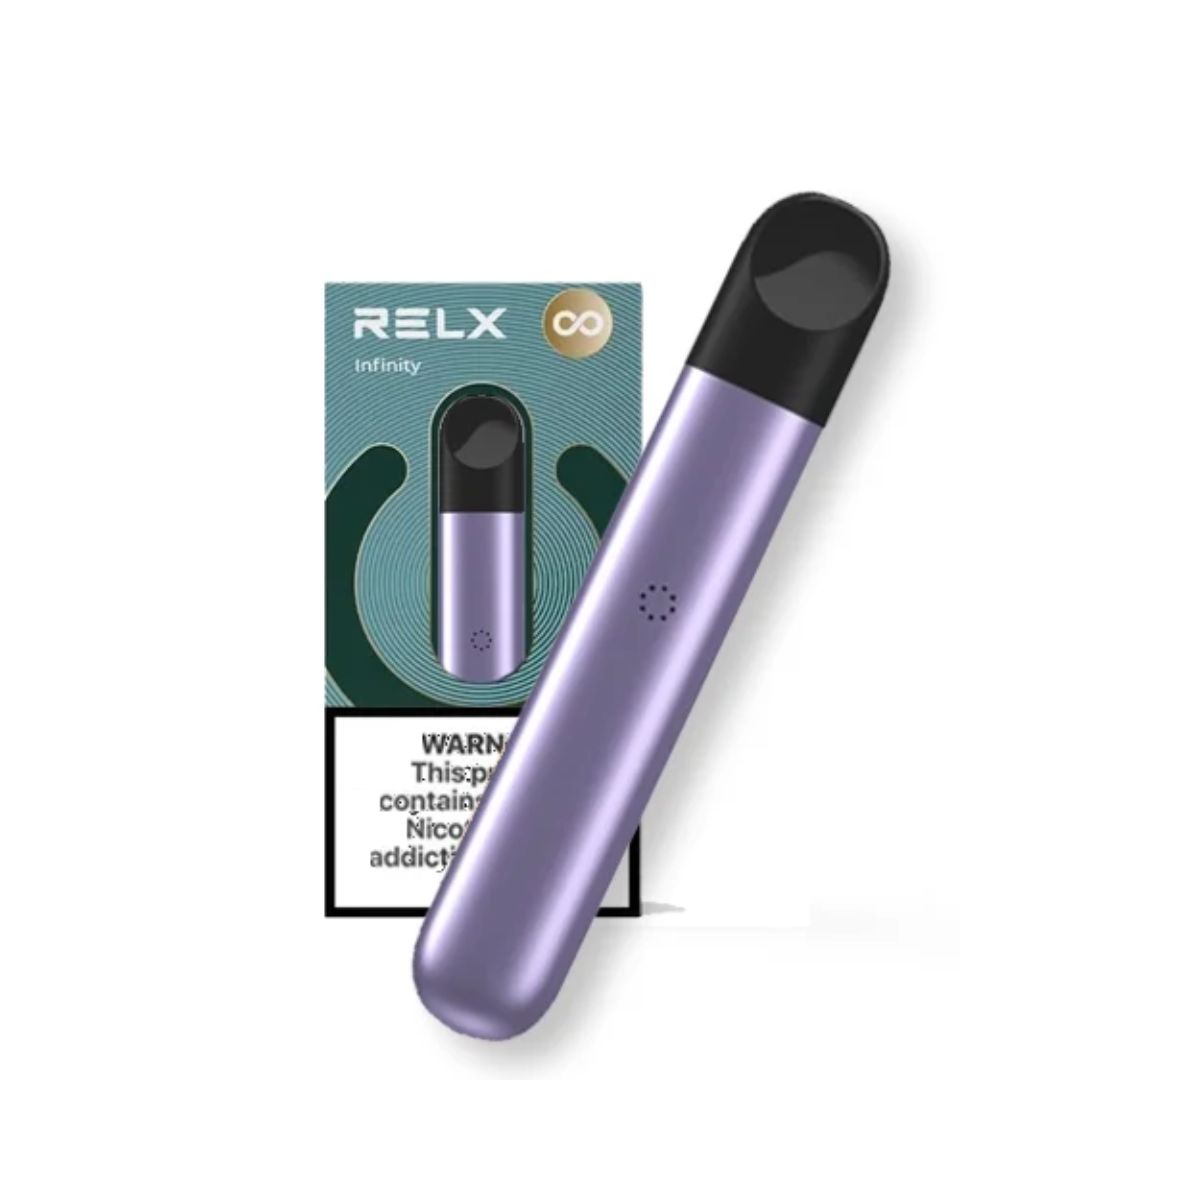 Relx Infinity Vape Device - French Lavender